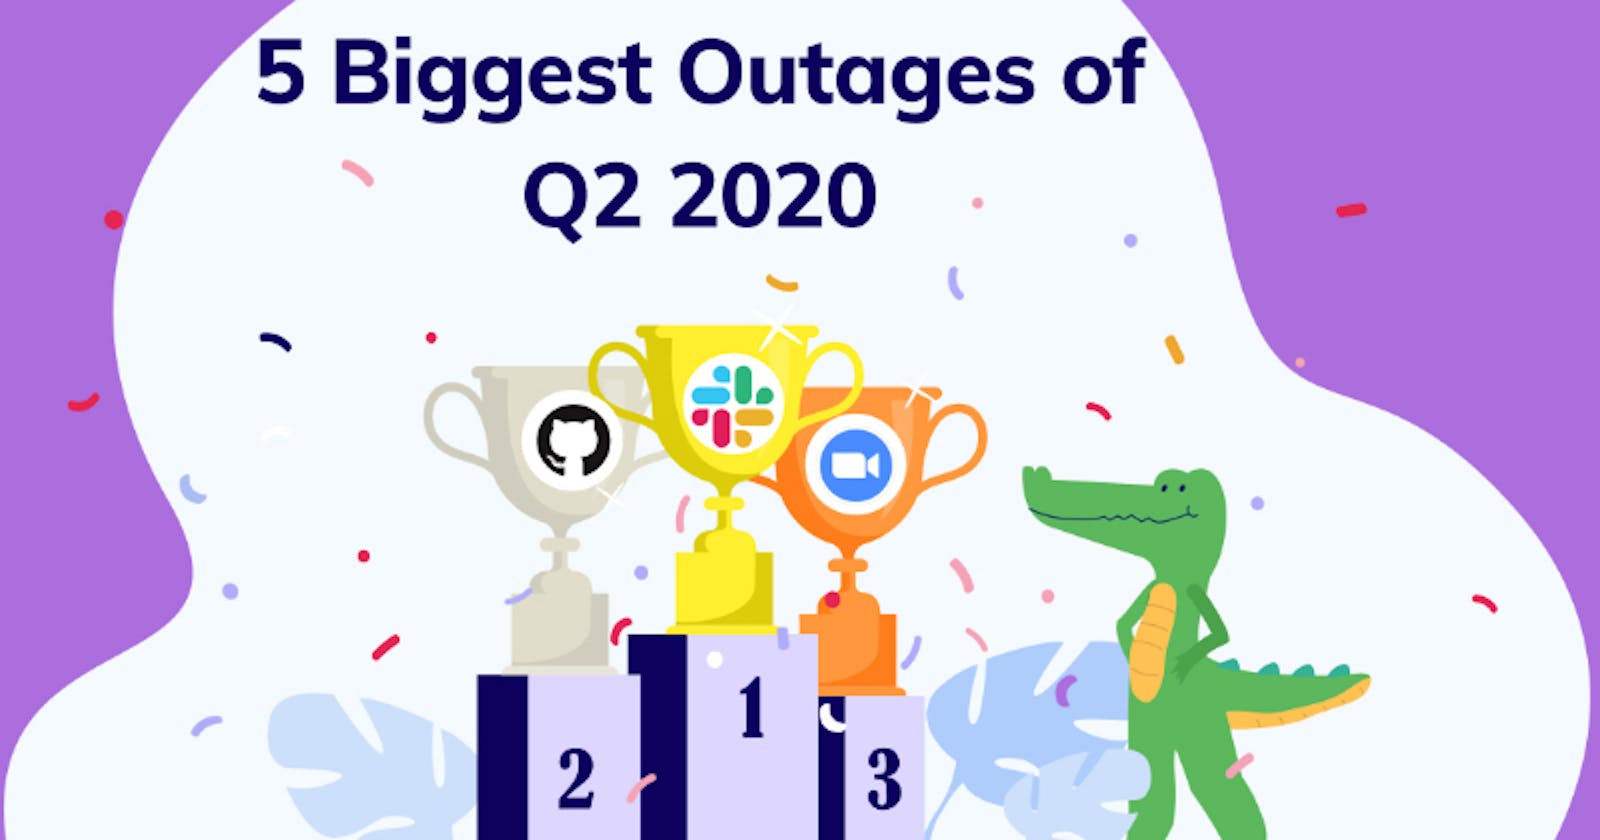 5 Biggest Outages of Q2 2020